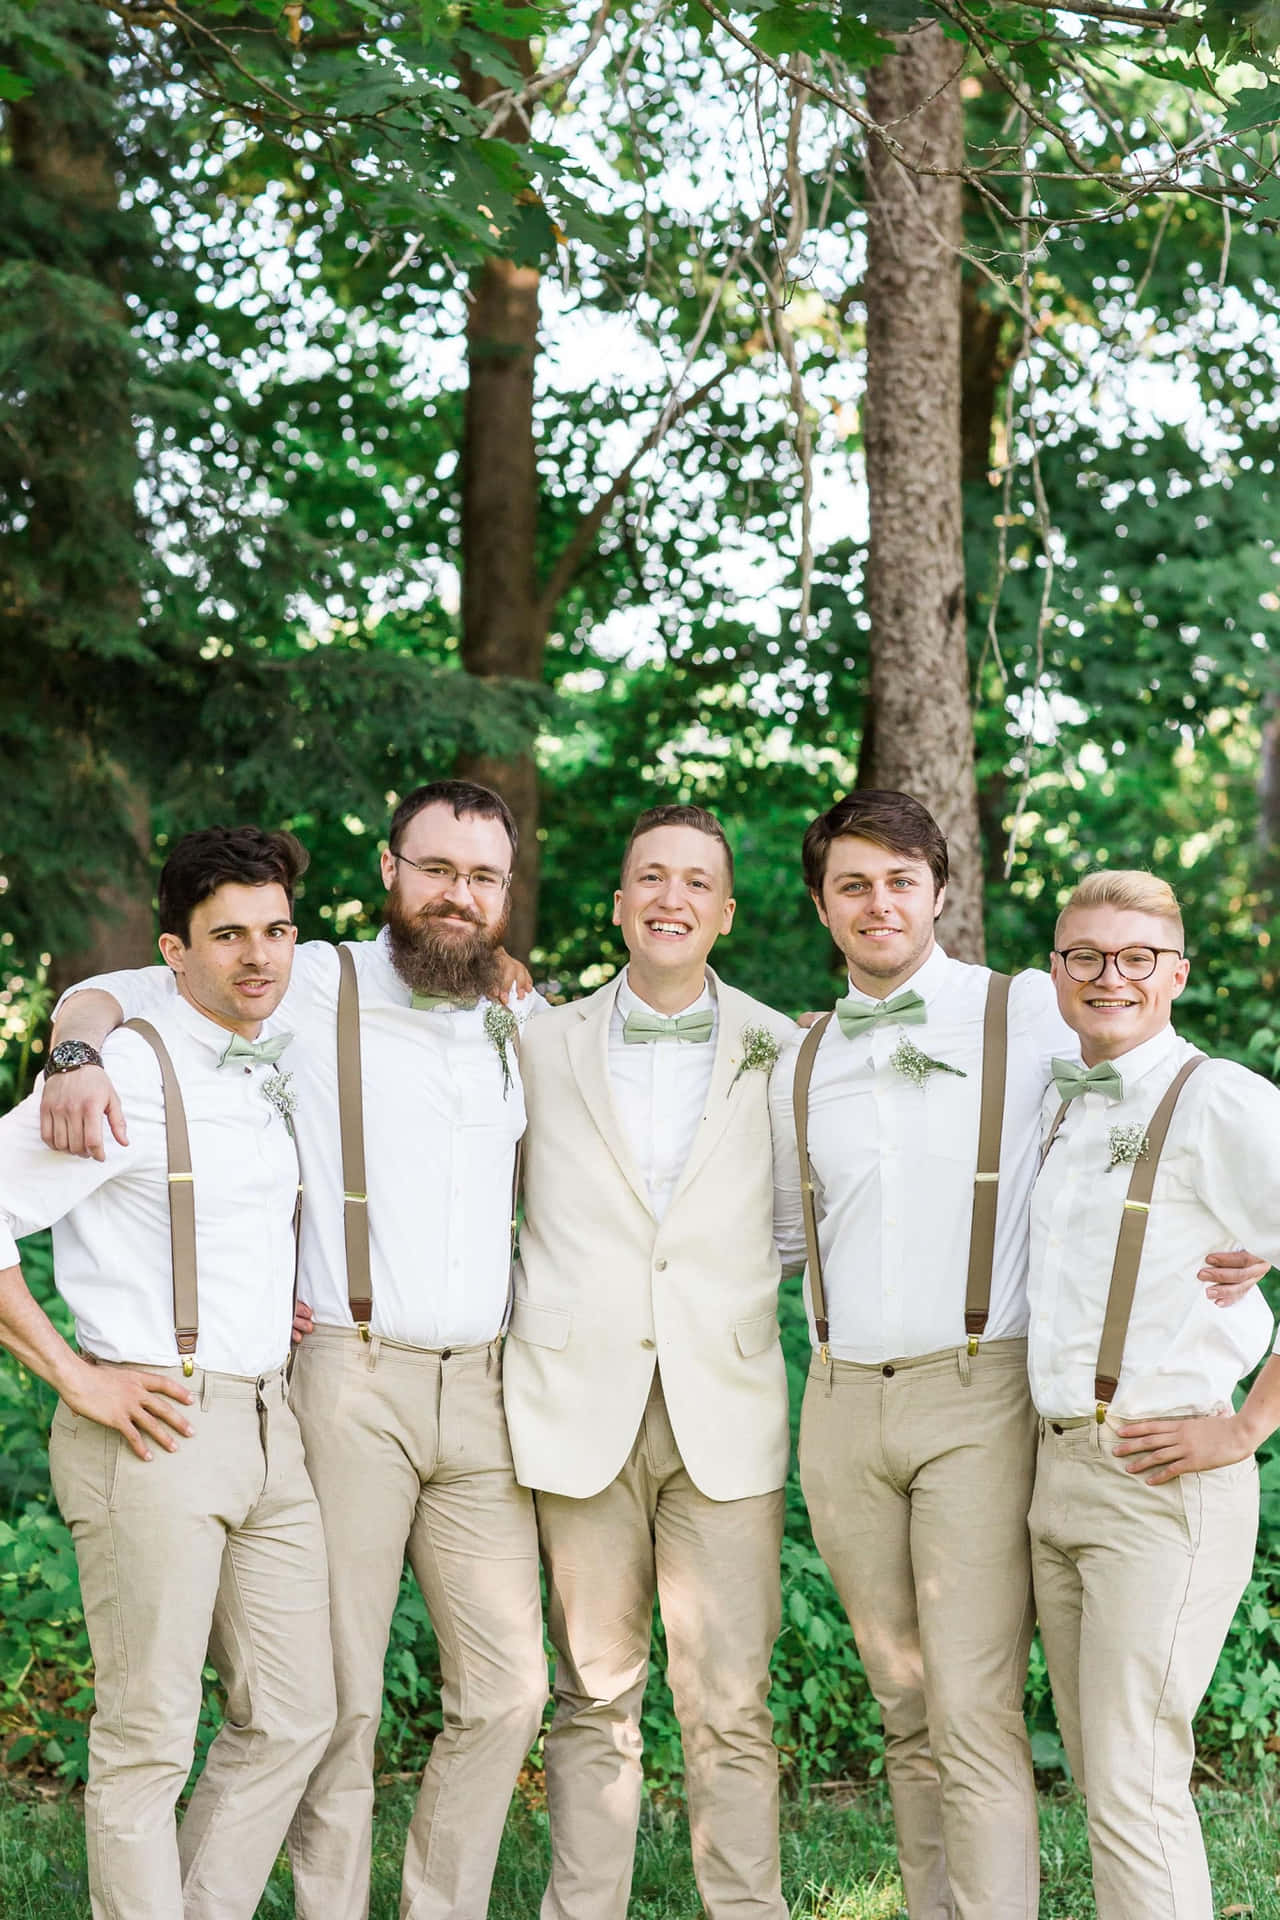 Groomsmen posing for a picture on the wedding day.